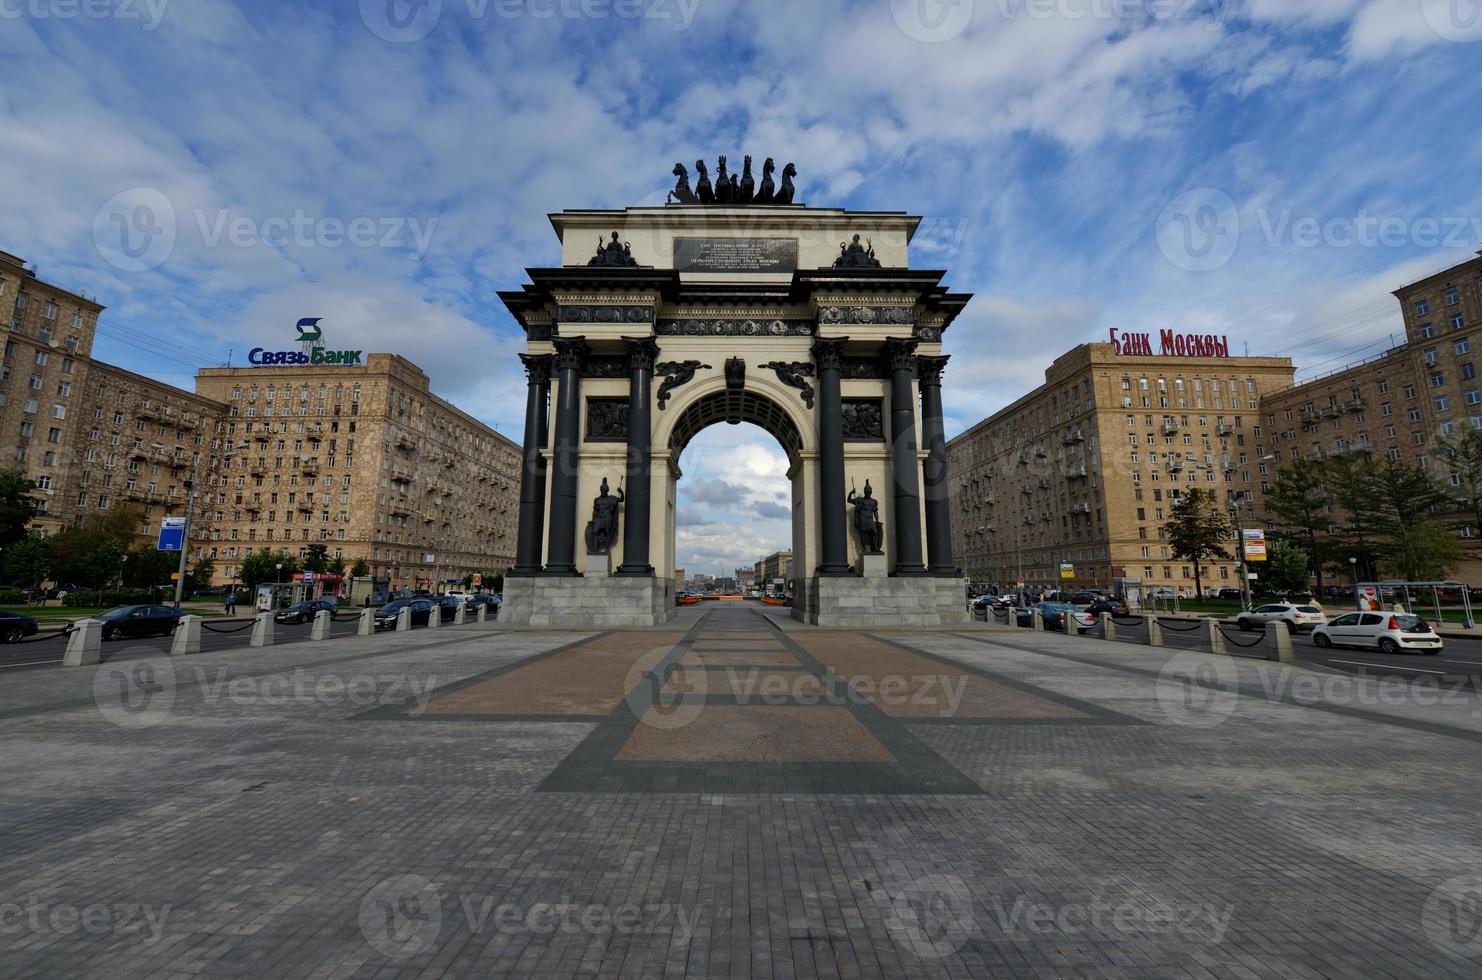 Triumphal Arch of Moscow photo